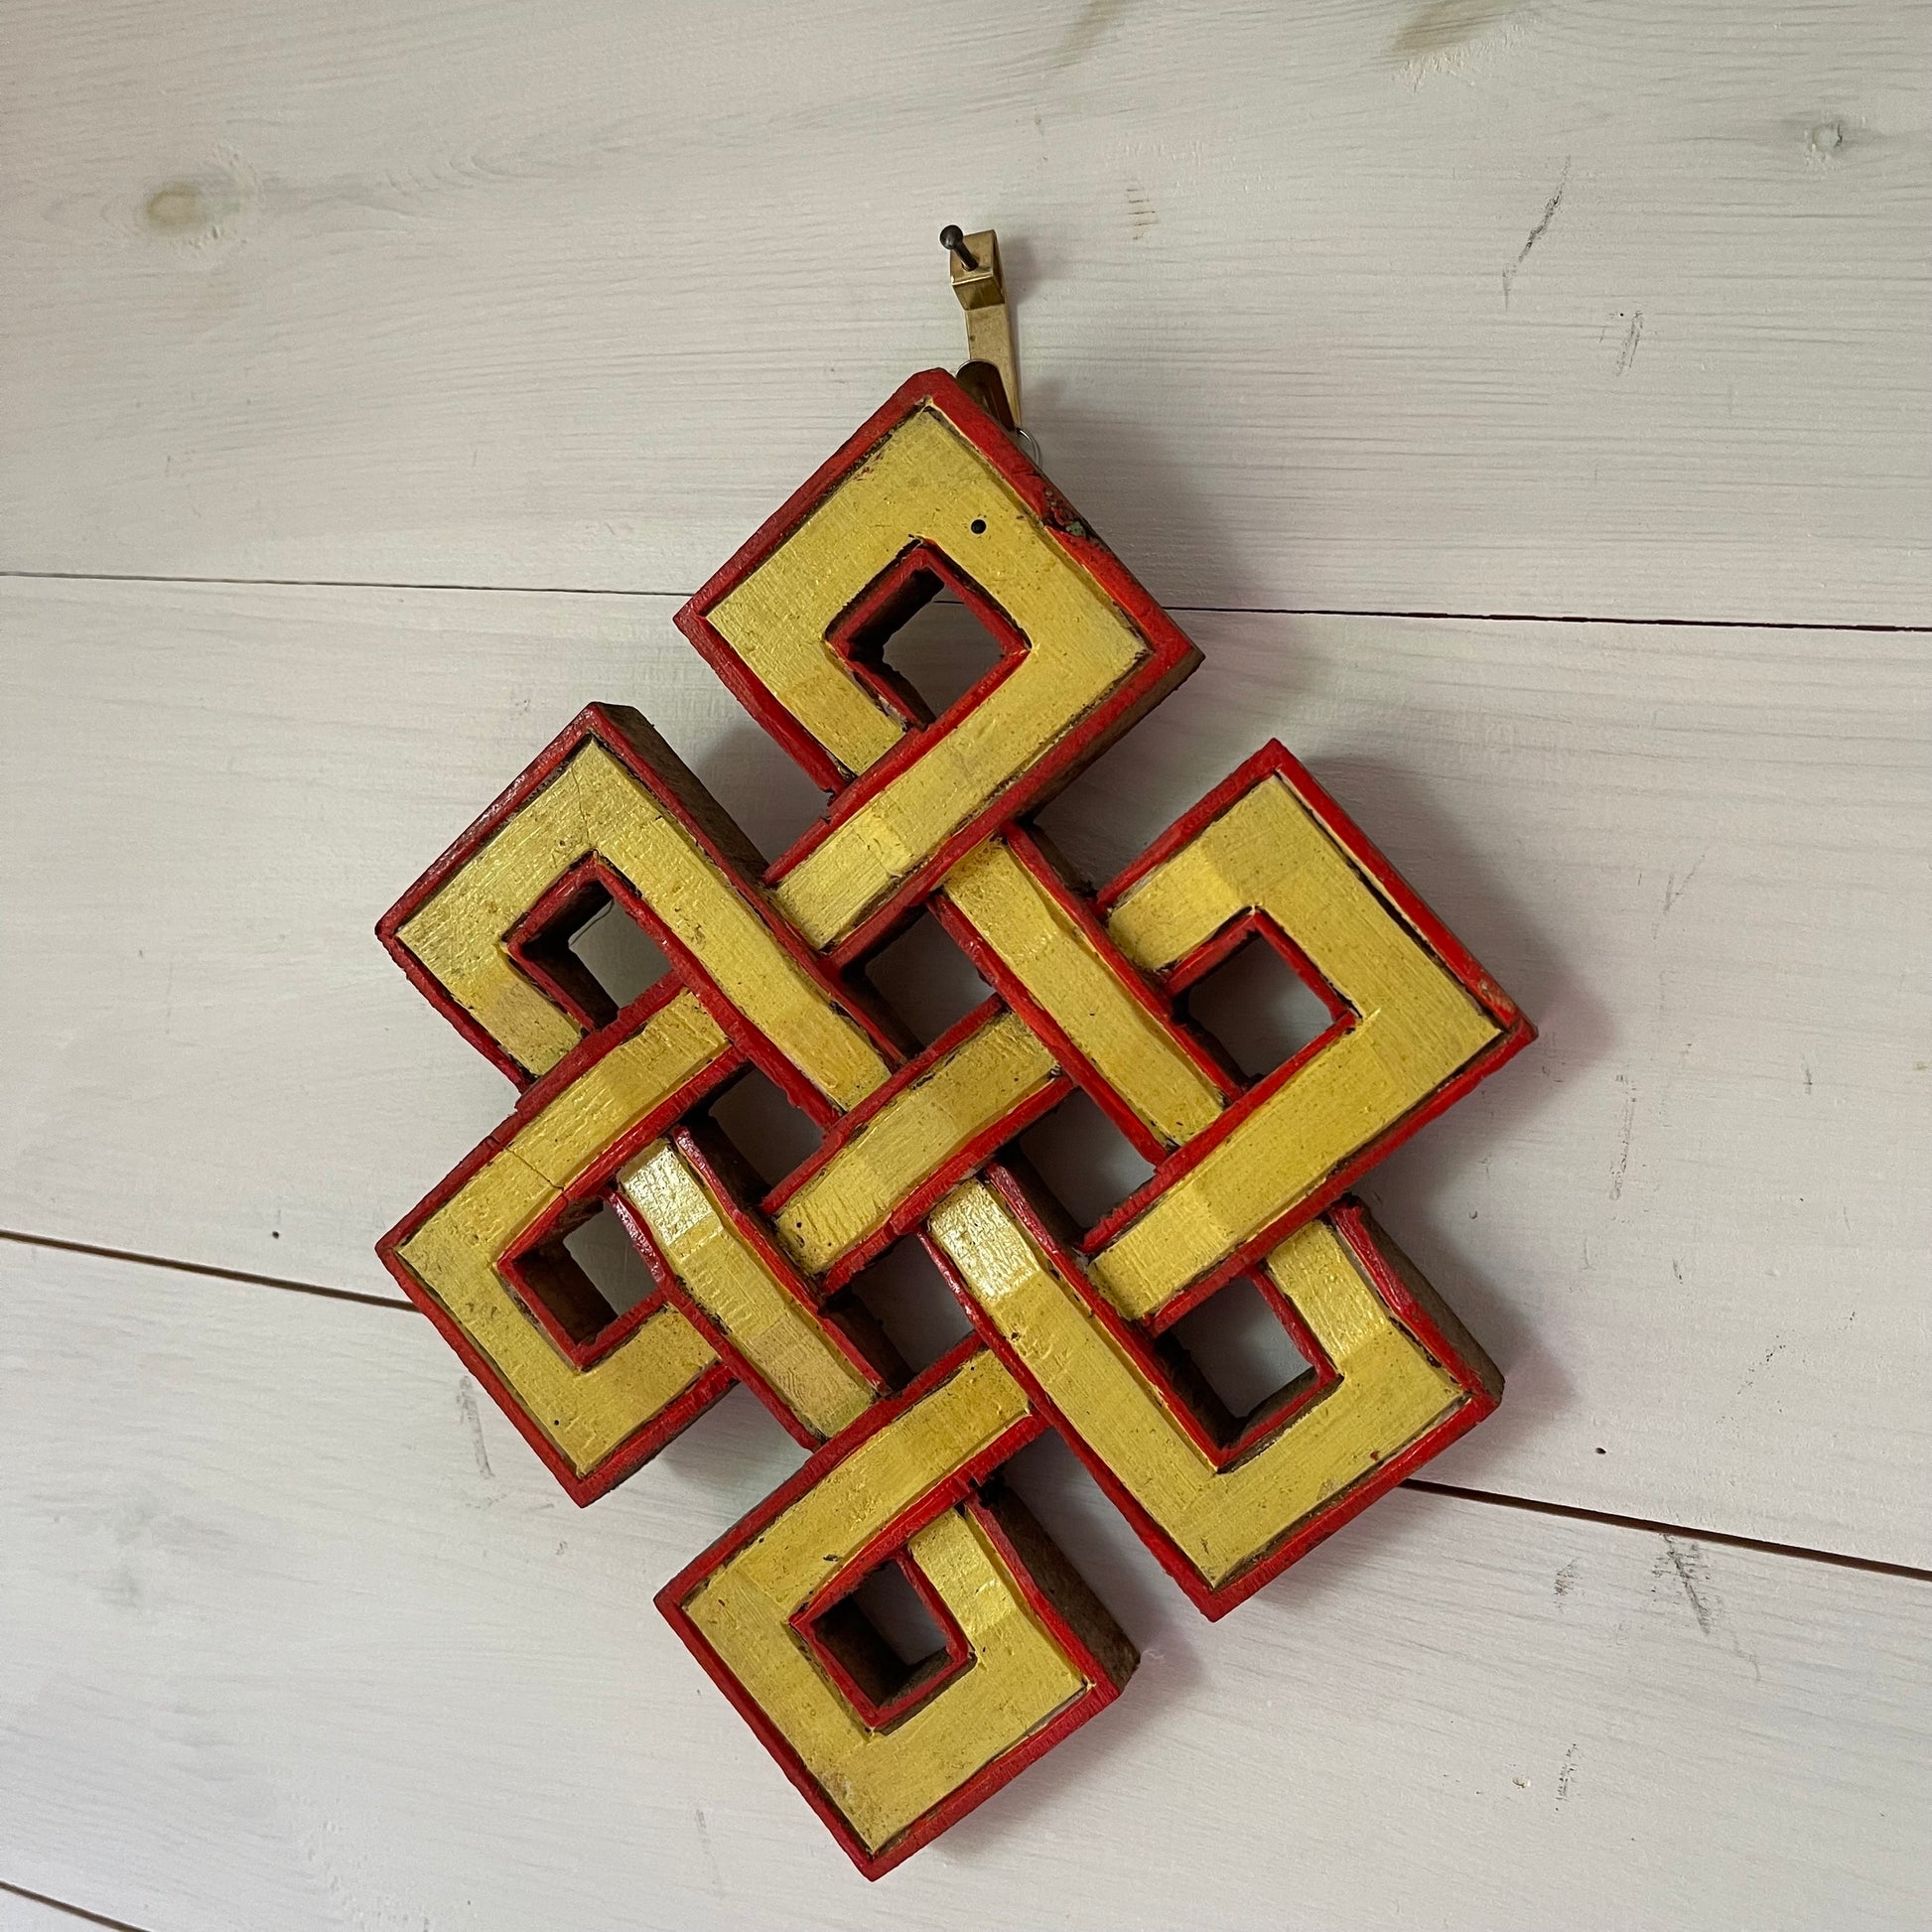 Tibetan Hand painted  Endless Knot Med 20 x 15 cm